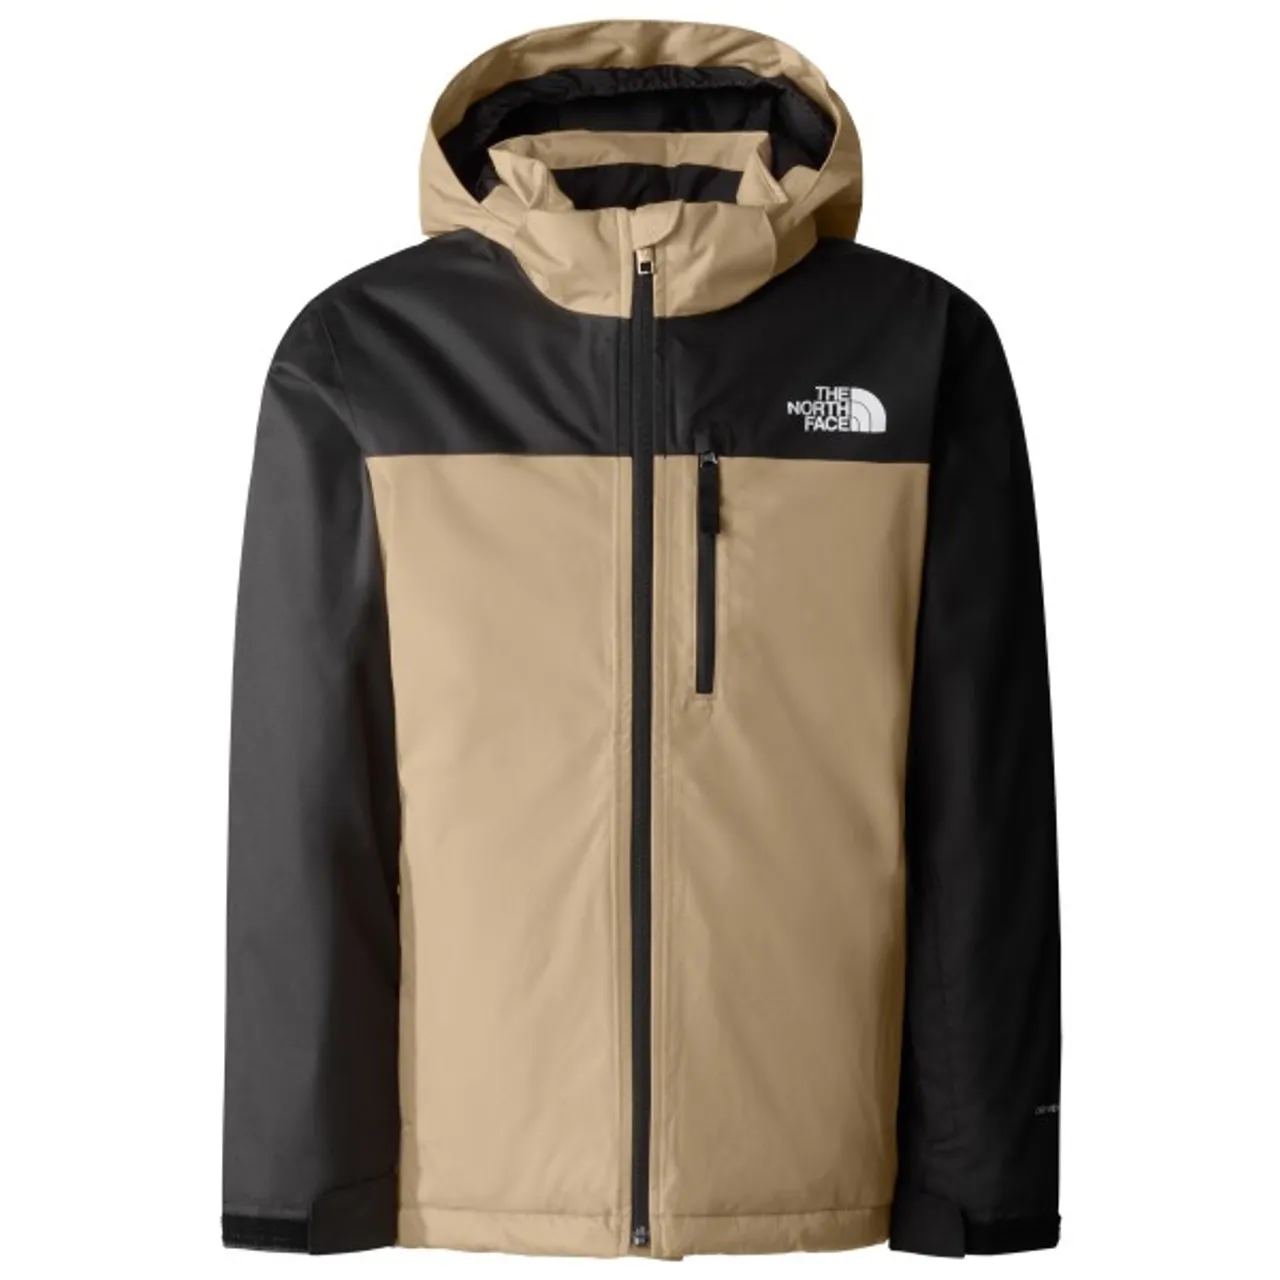 The North Face - Teen's Snowquest X Insulated Jacket - Skijacke